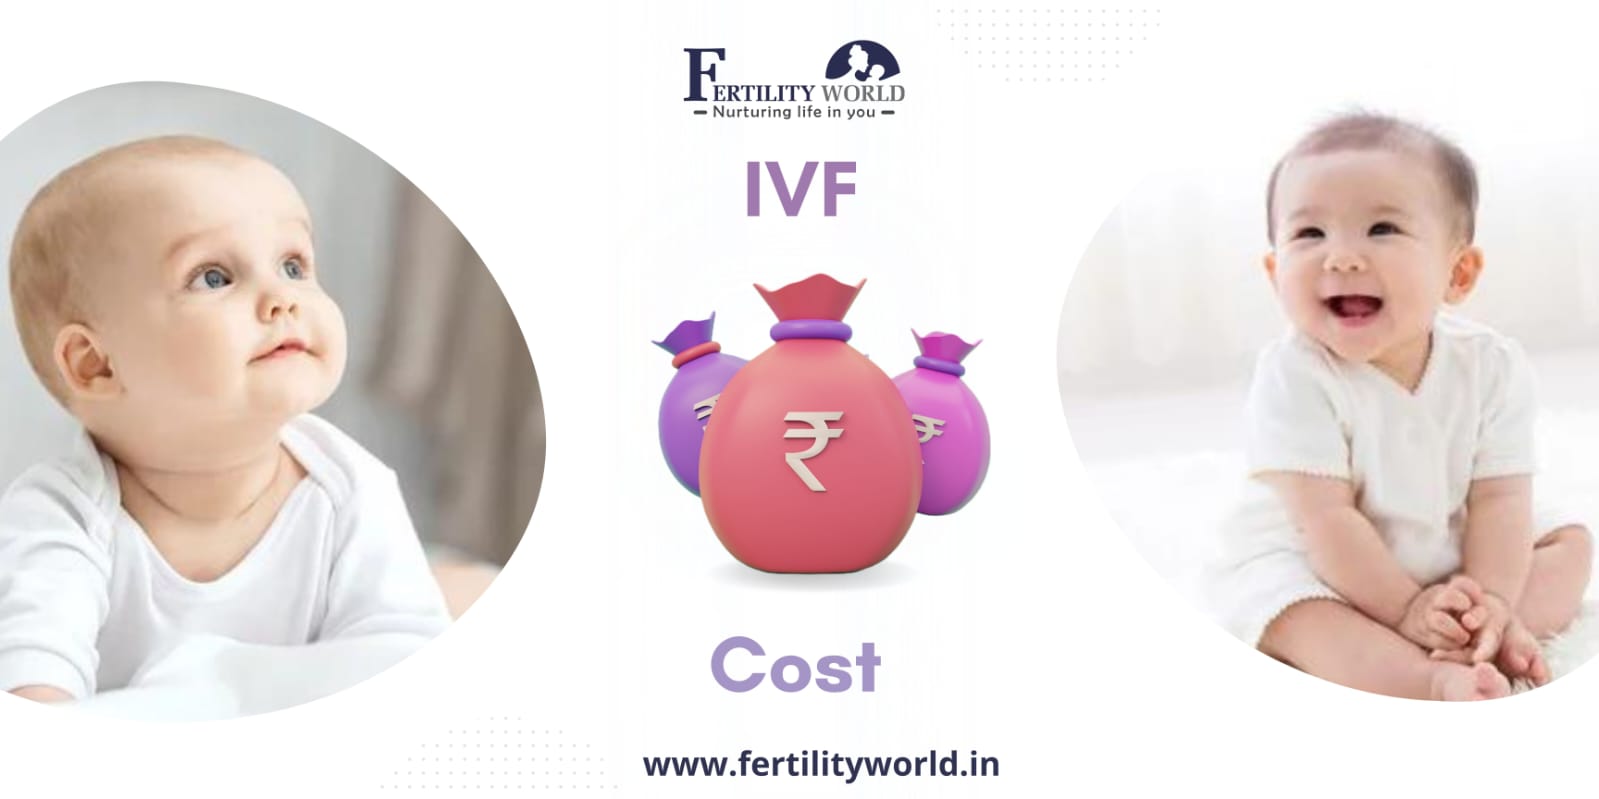 What is the cost of IVF treatment?